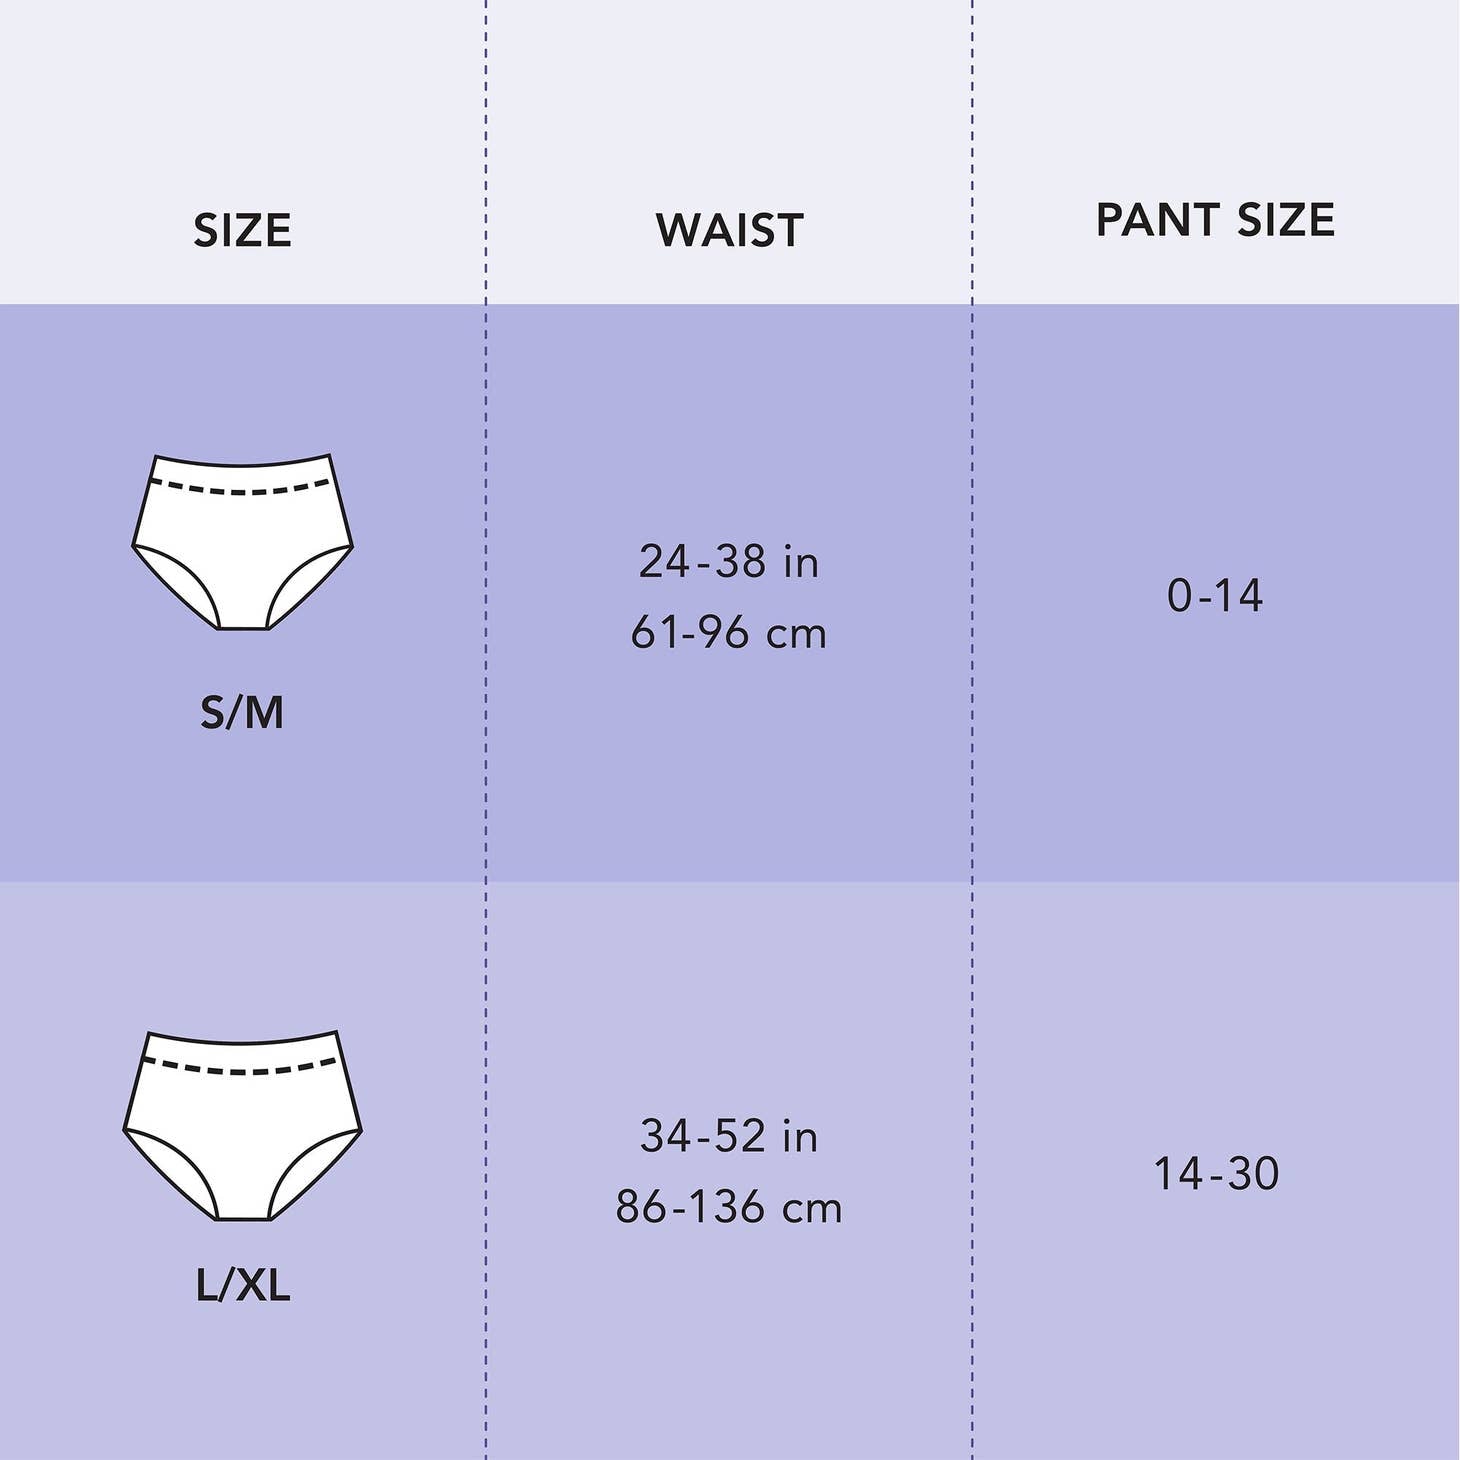 Organic Cotton Absorbent Panties Breathable Period Underwear for